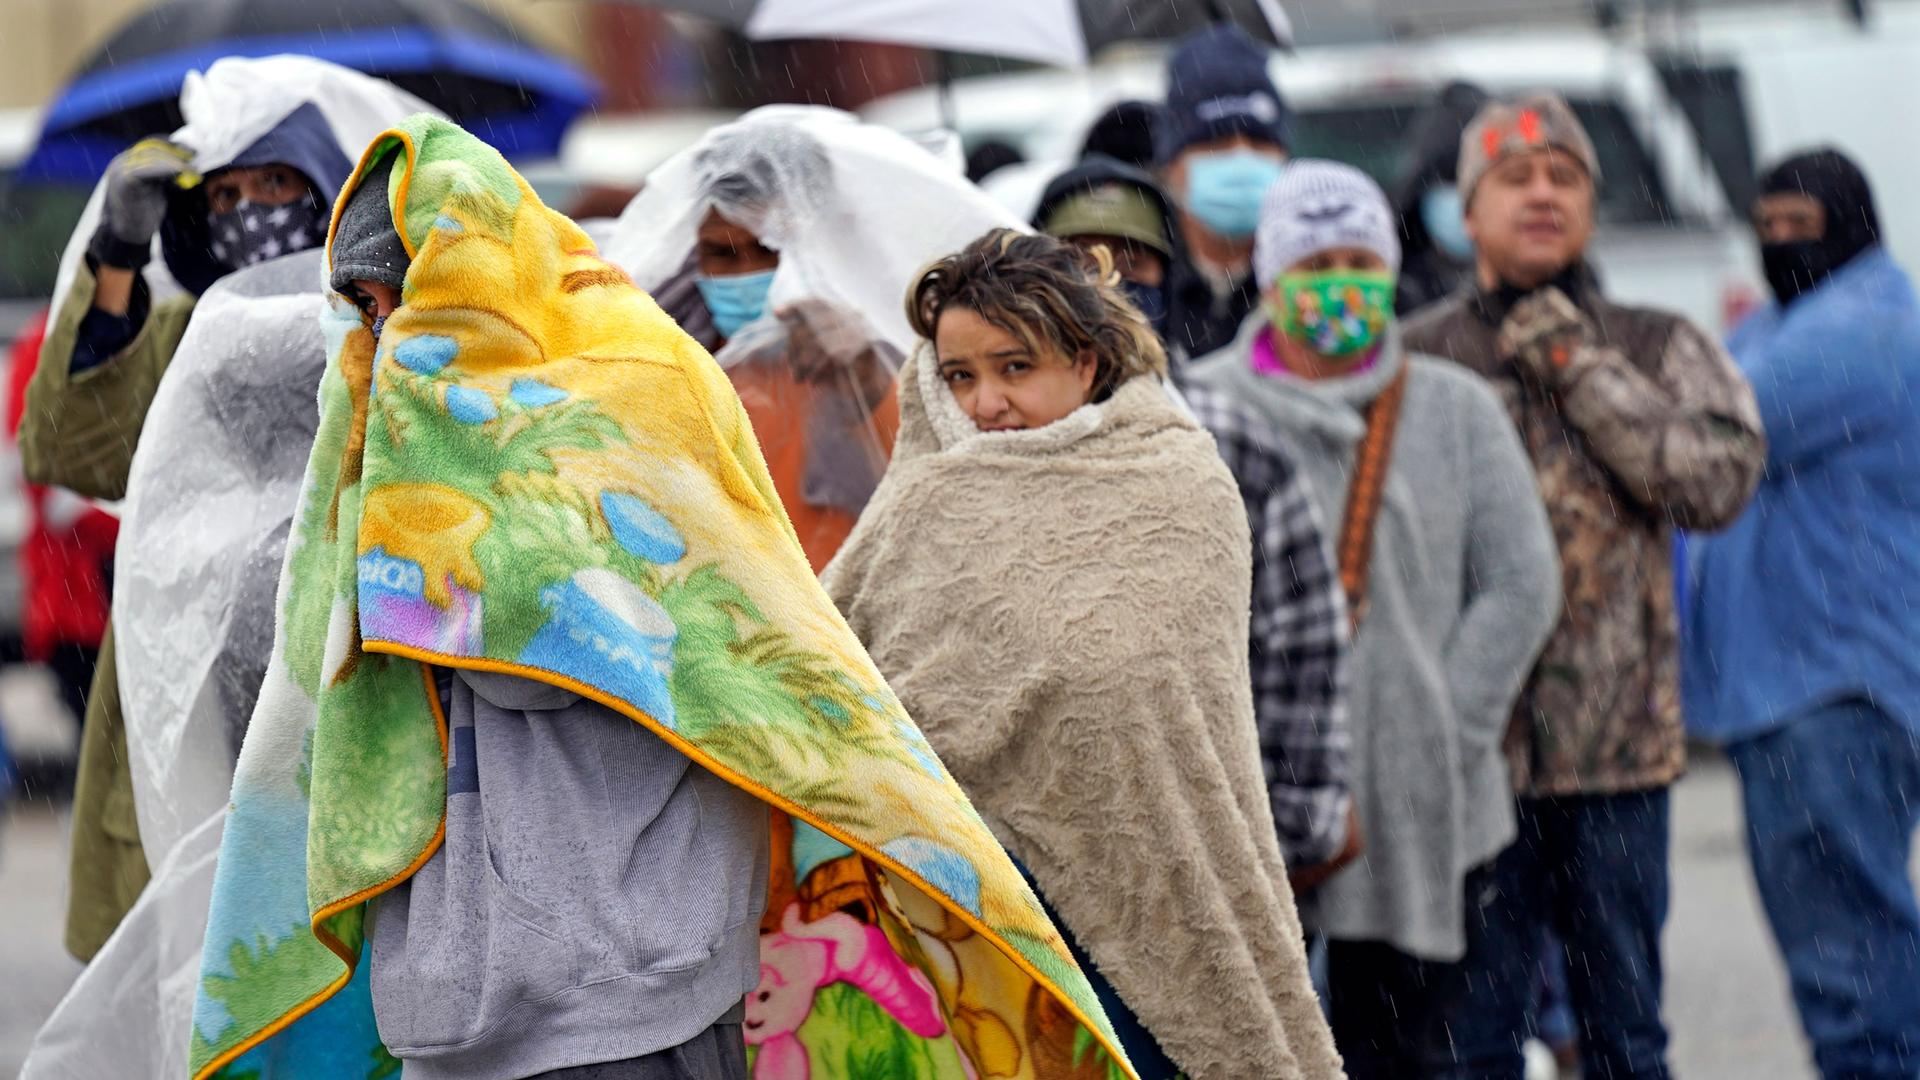 A line of people are shown with many people wrapping large blankets around themselves.